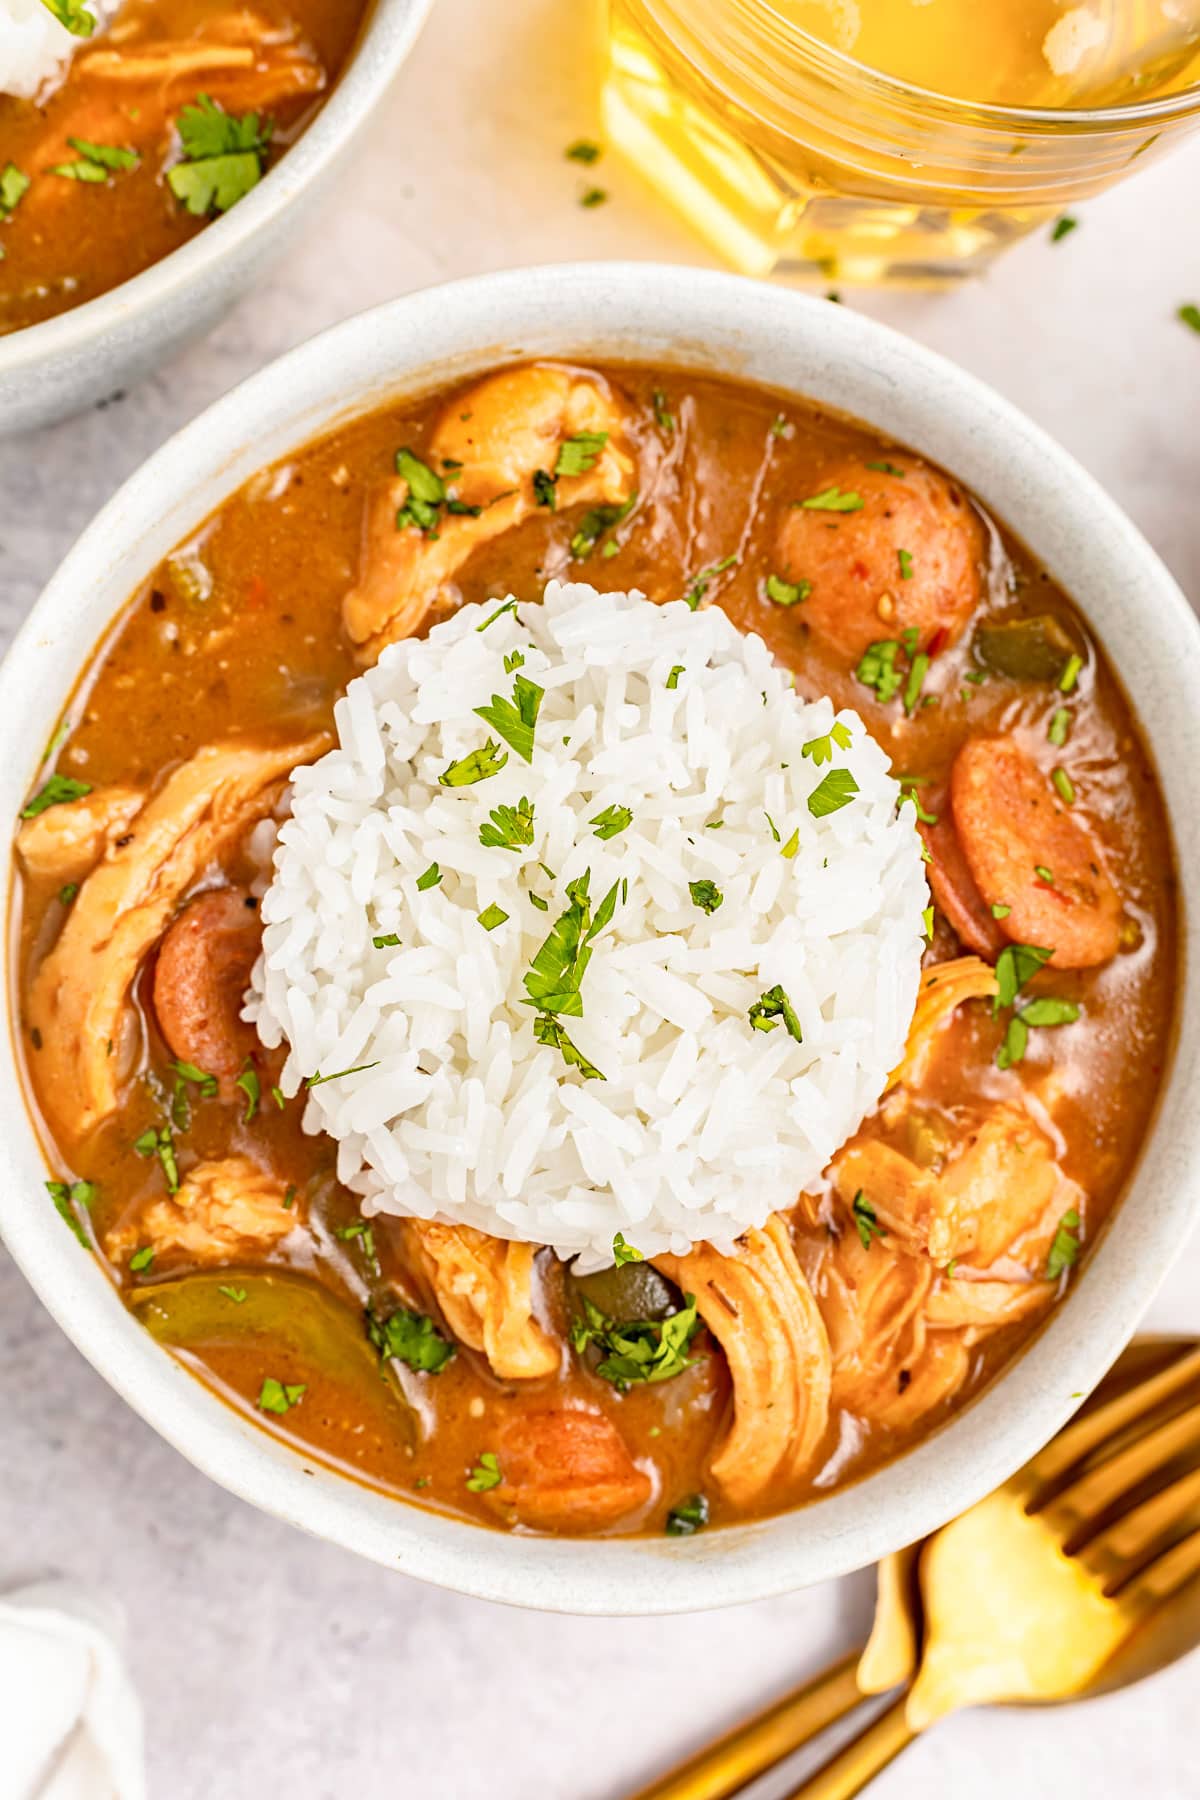 https://40aprons.com/wp-content/uploads/2021/09/chicken-and-sausage-gumbo-1.jpg